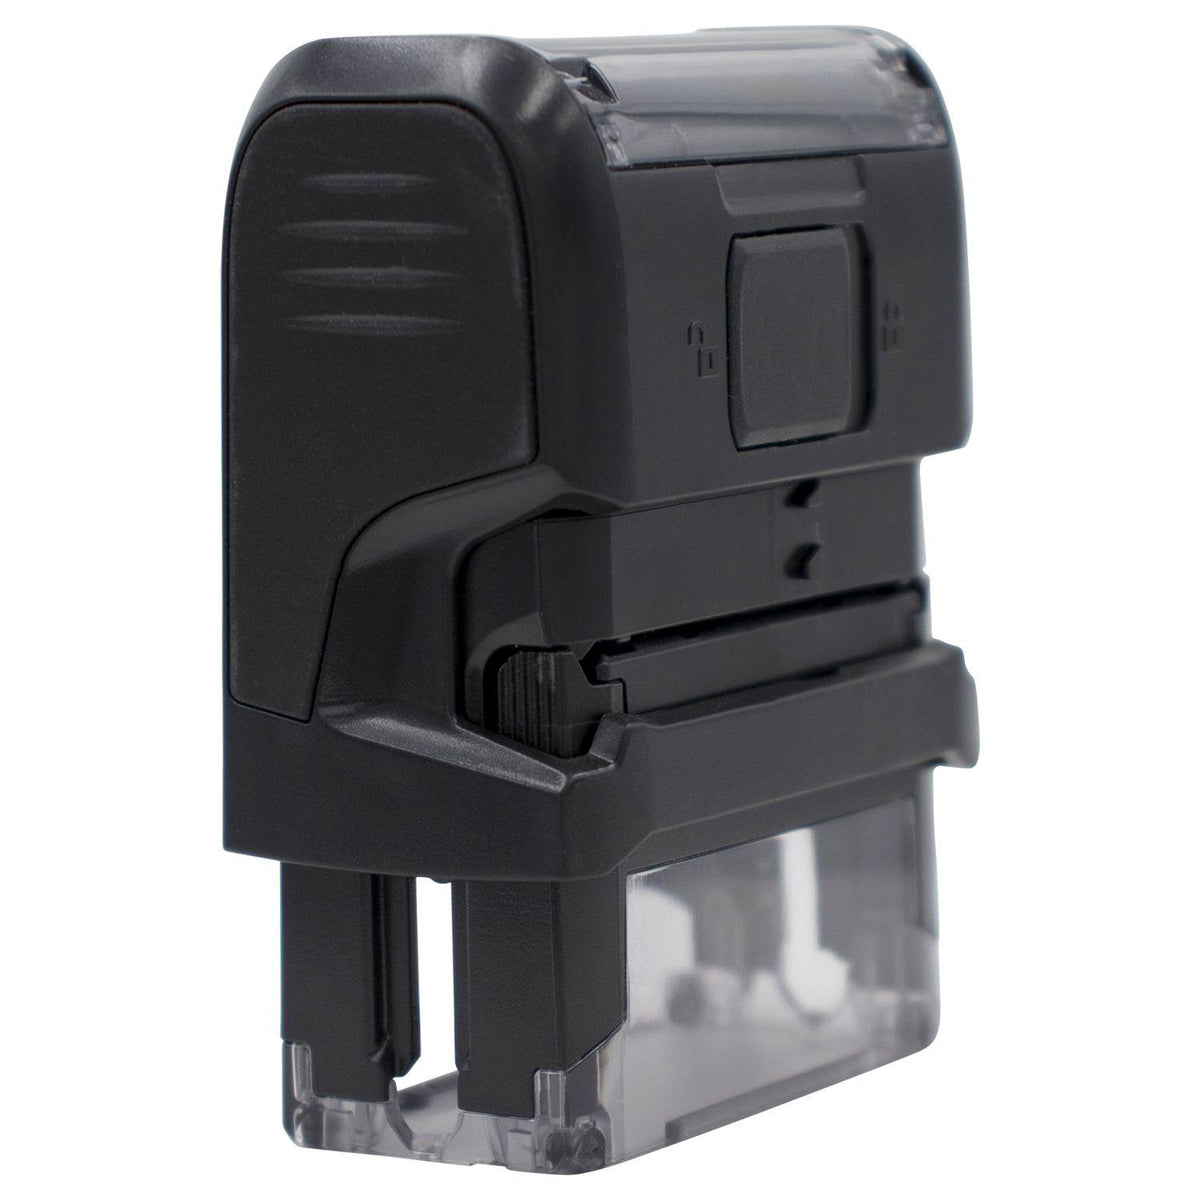 Self-Inking Bold Admitted Stamp - Engineer Seal Stamps - Brand_Trodat, Impression Size_Small, Stamp Type_Self-Inking Stamp, Type of Use_Medical Office